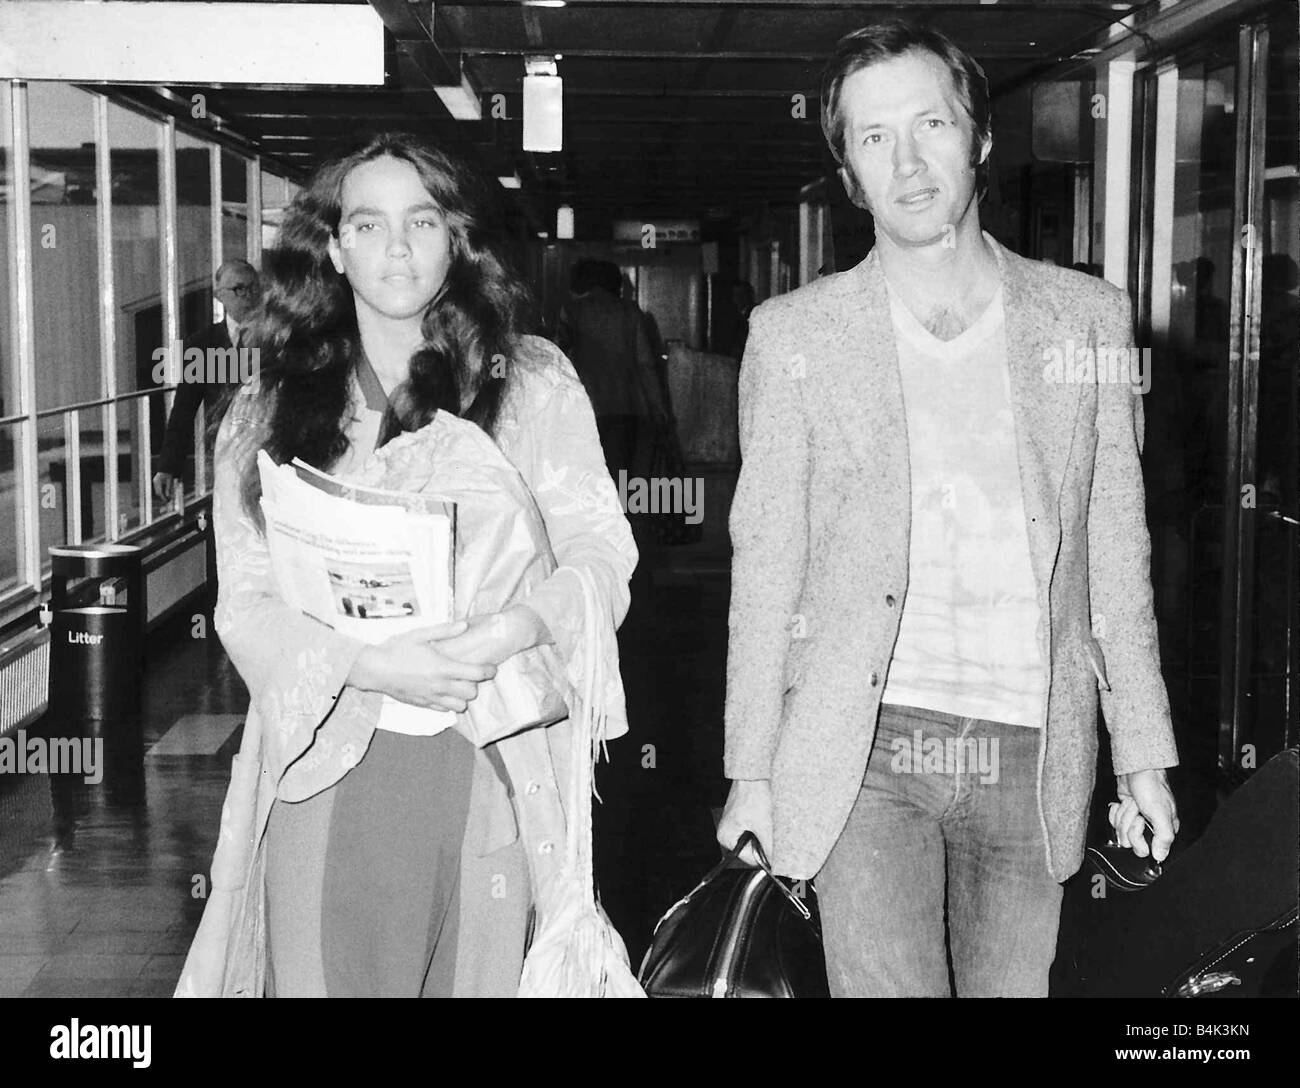 David Carradine with his first wife Linda arrive at Heathrow Airport from Los Angeles on their way to Cannes film festival DBase Stock Photo